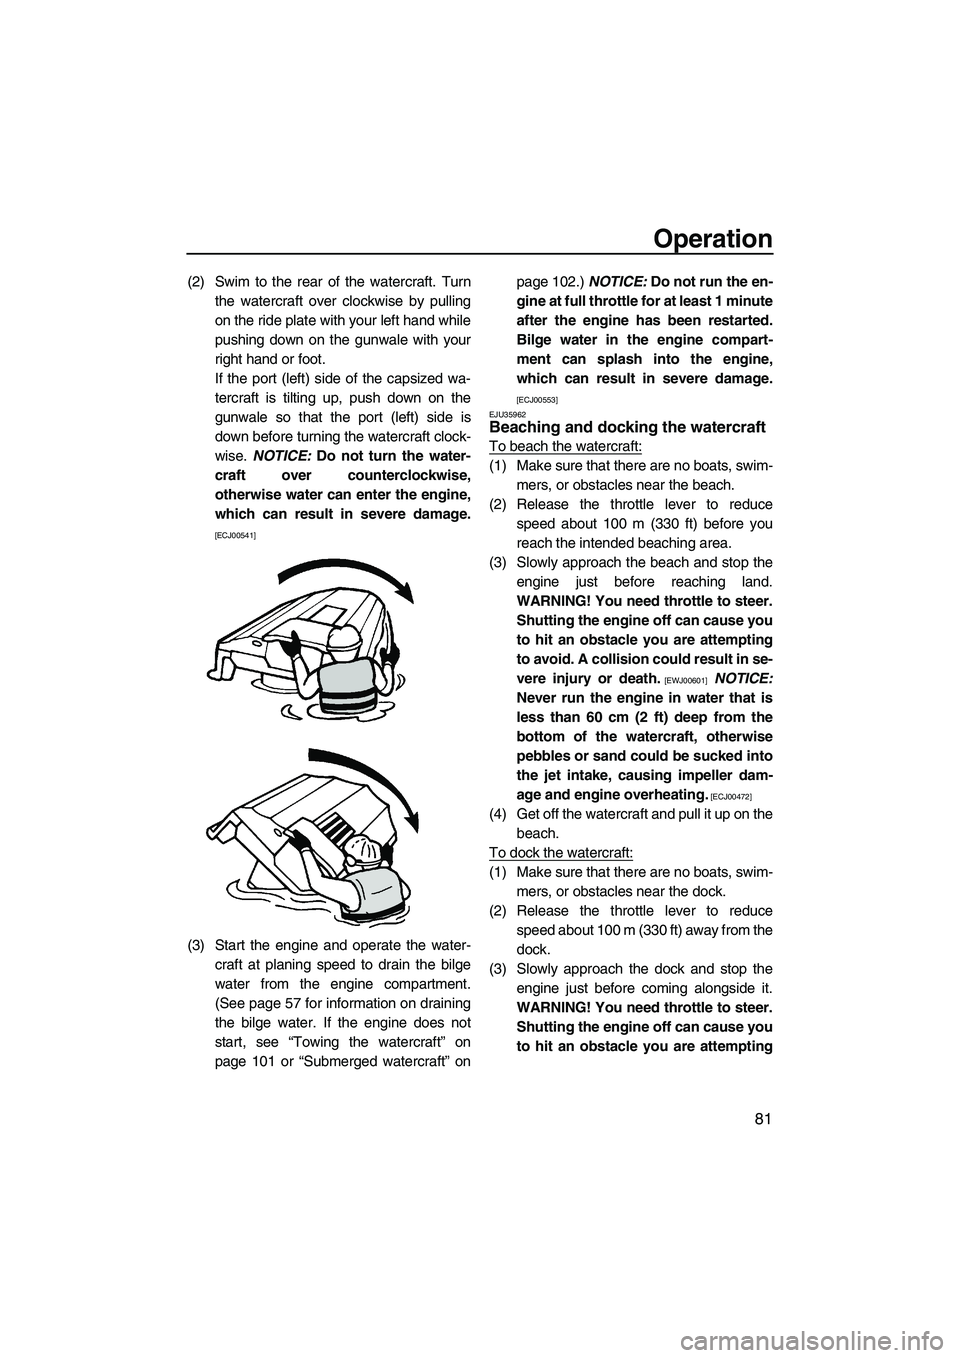 YAMAHA SVHO 2011  Owners Manual Operation
81
(2) Swim to the rear of the watercraft. Turn
the watercraft over clockwise by pulling
on the ride plate with your left hand while
pushing down on the gunwale with your
right hand or foot.